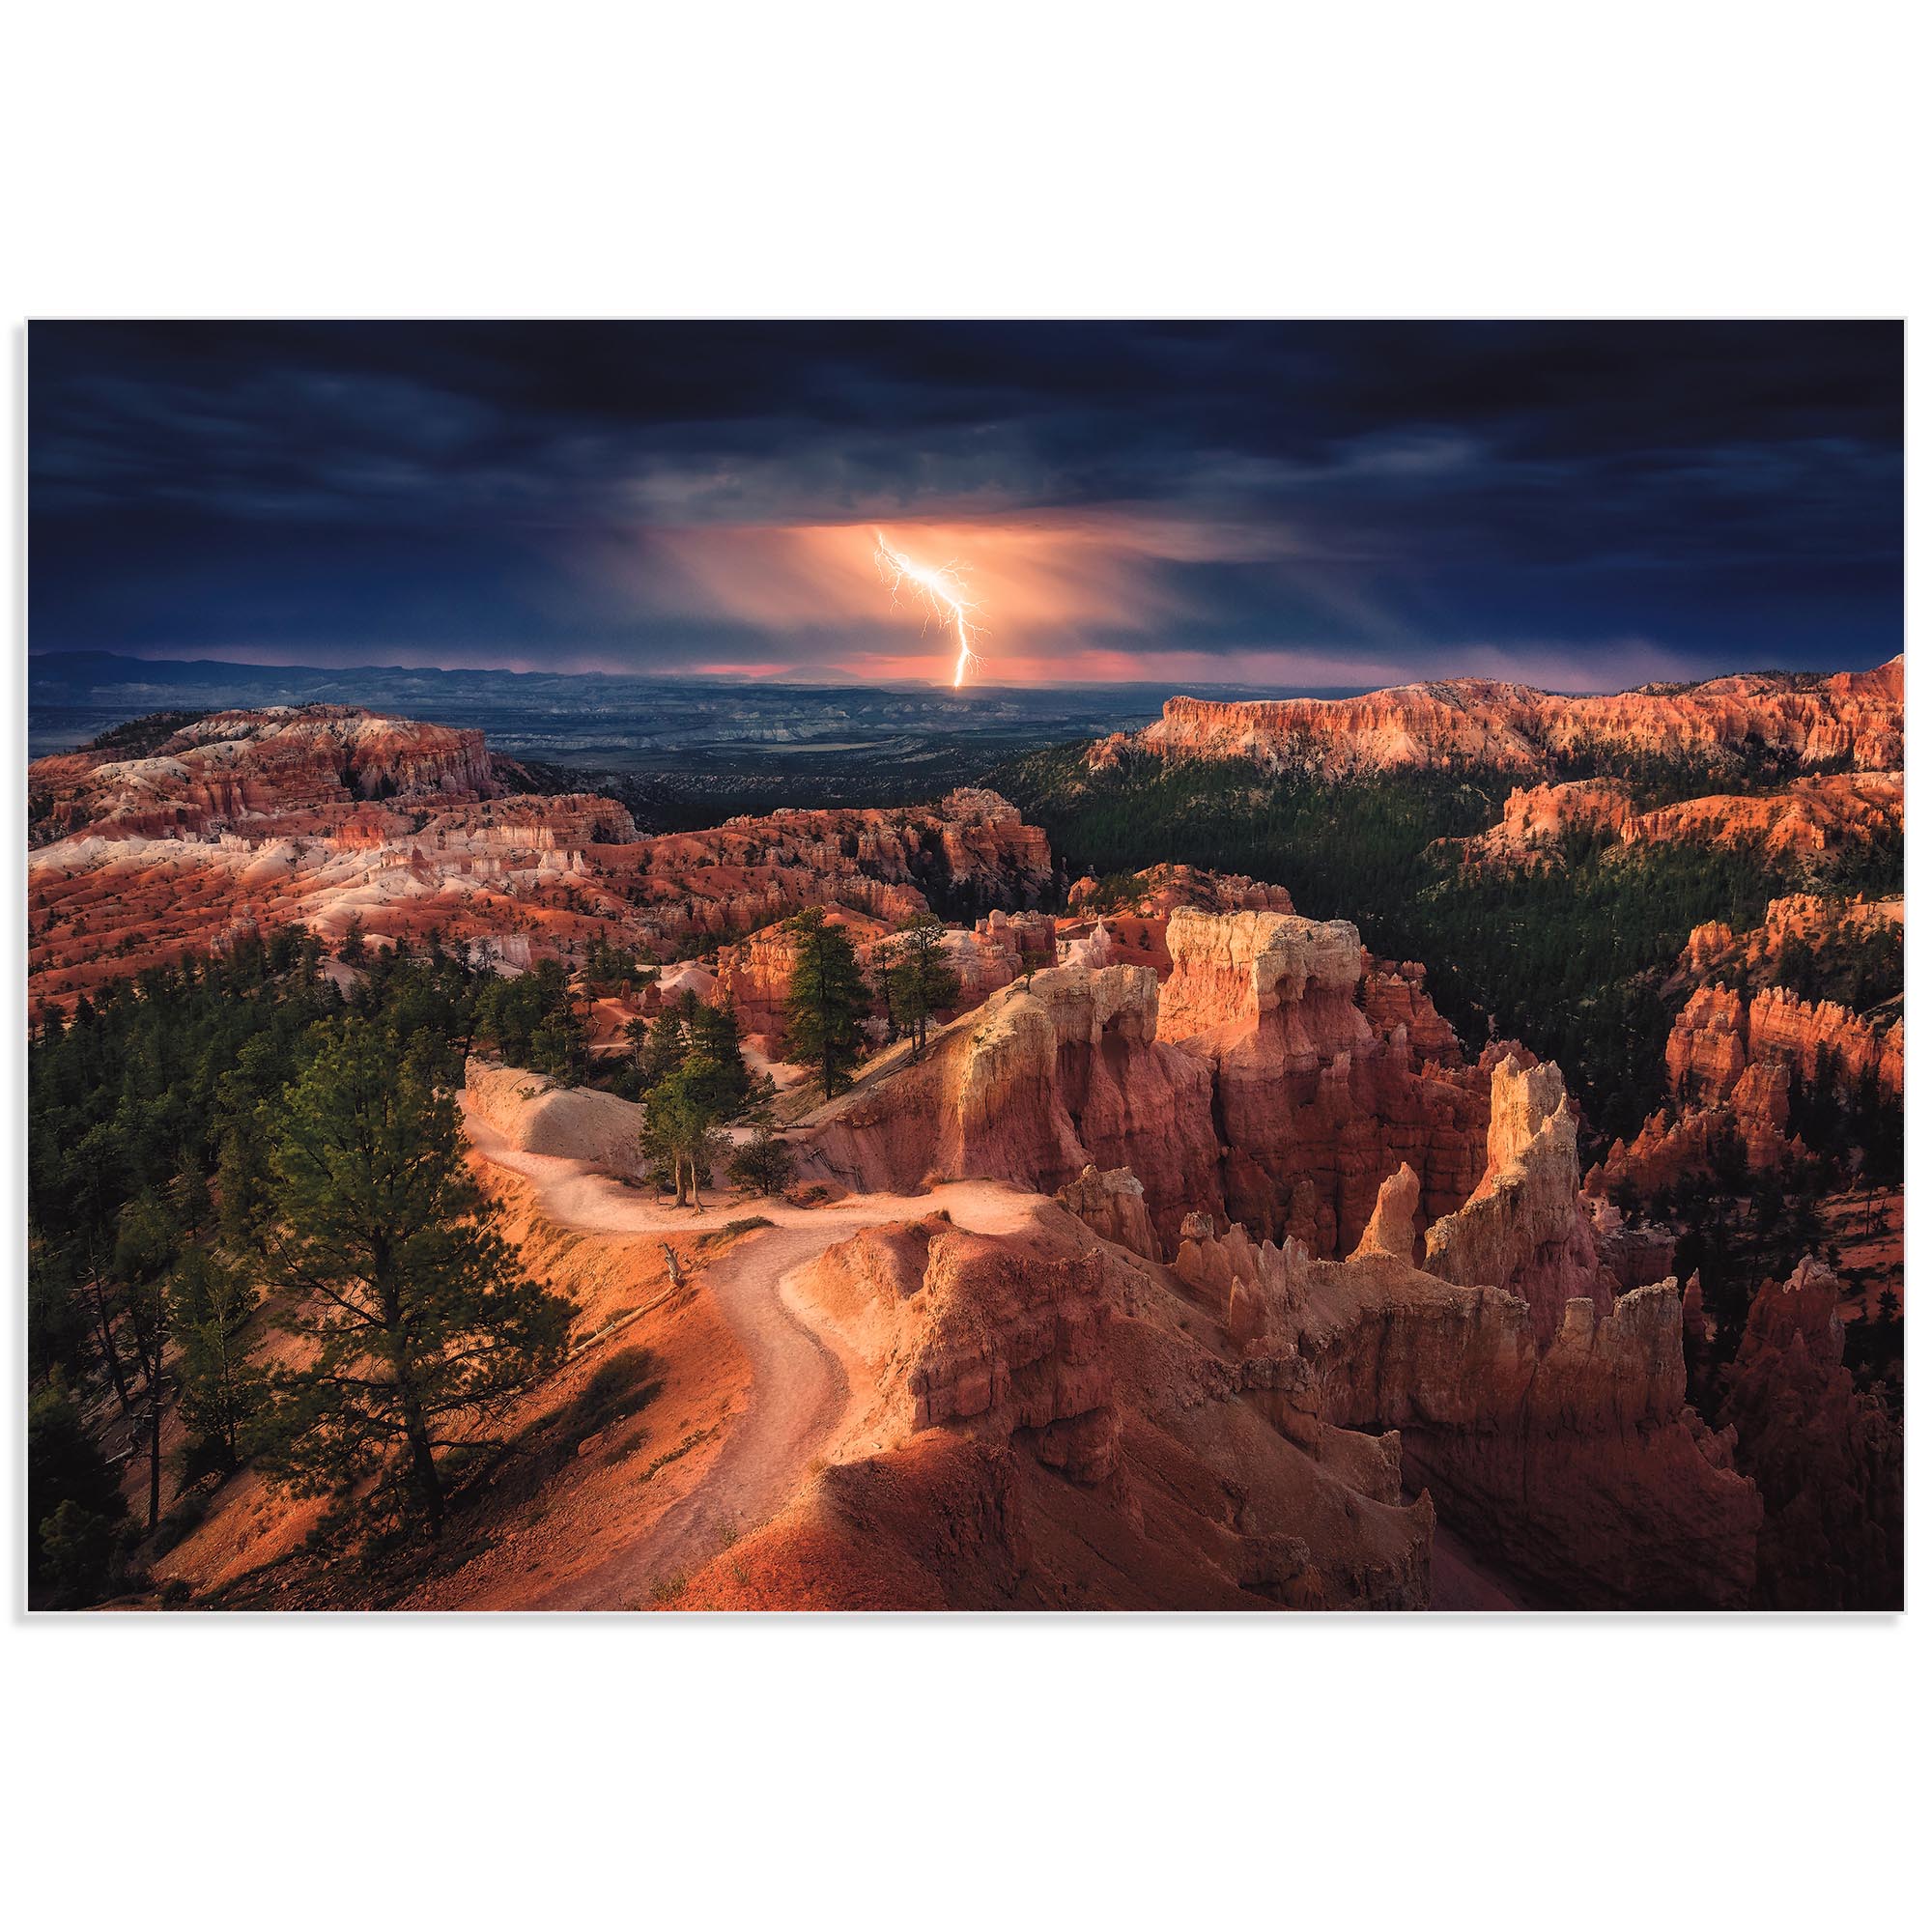 Lightning Over Bryce Canyon by Stefan Mitterwallner - Storm Pictures on Metal or Acrylic - Alternate View 2